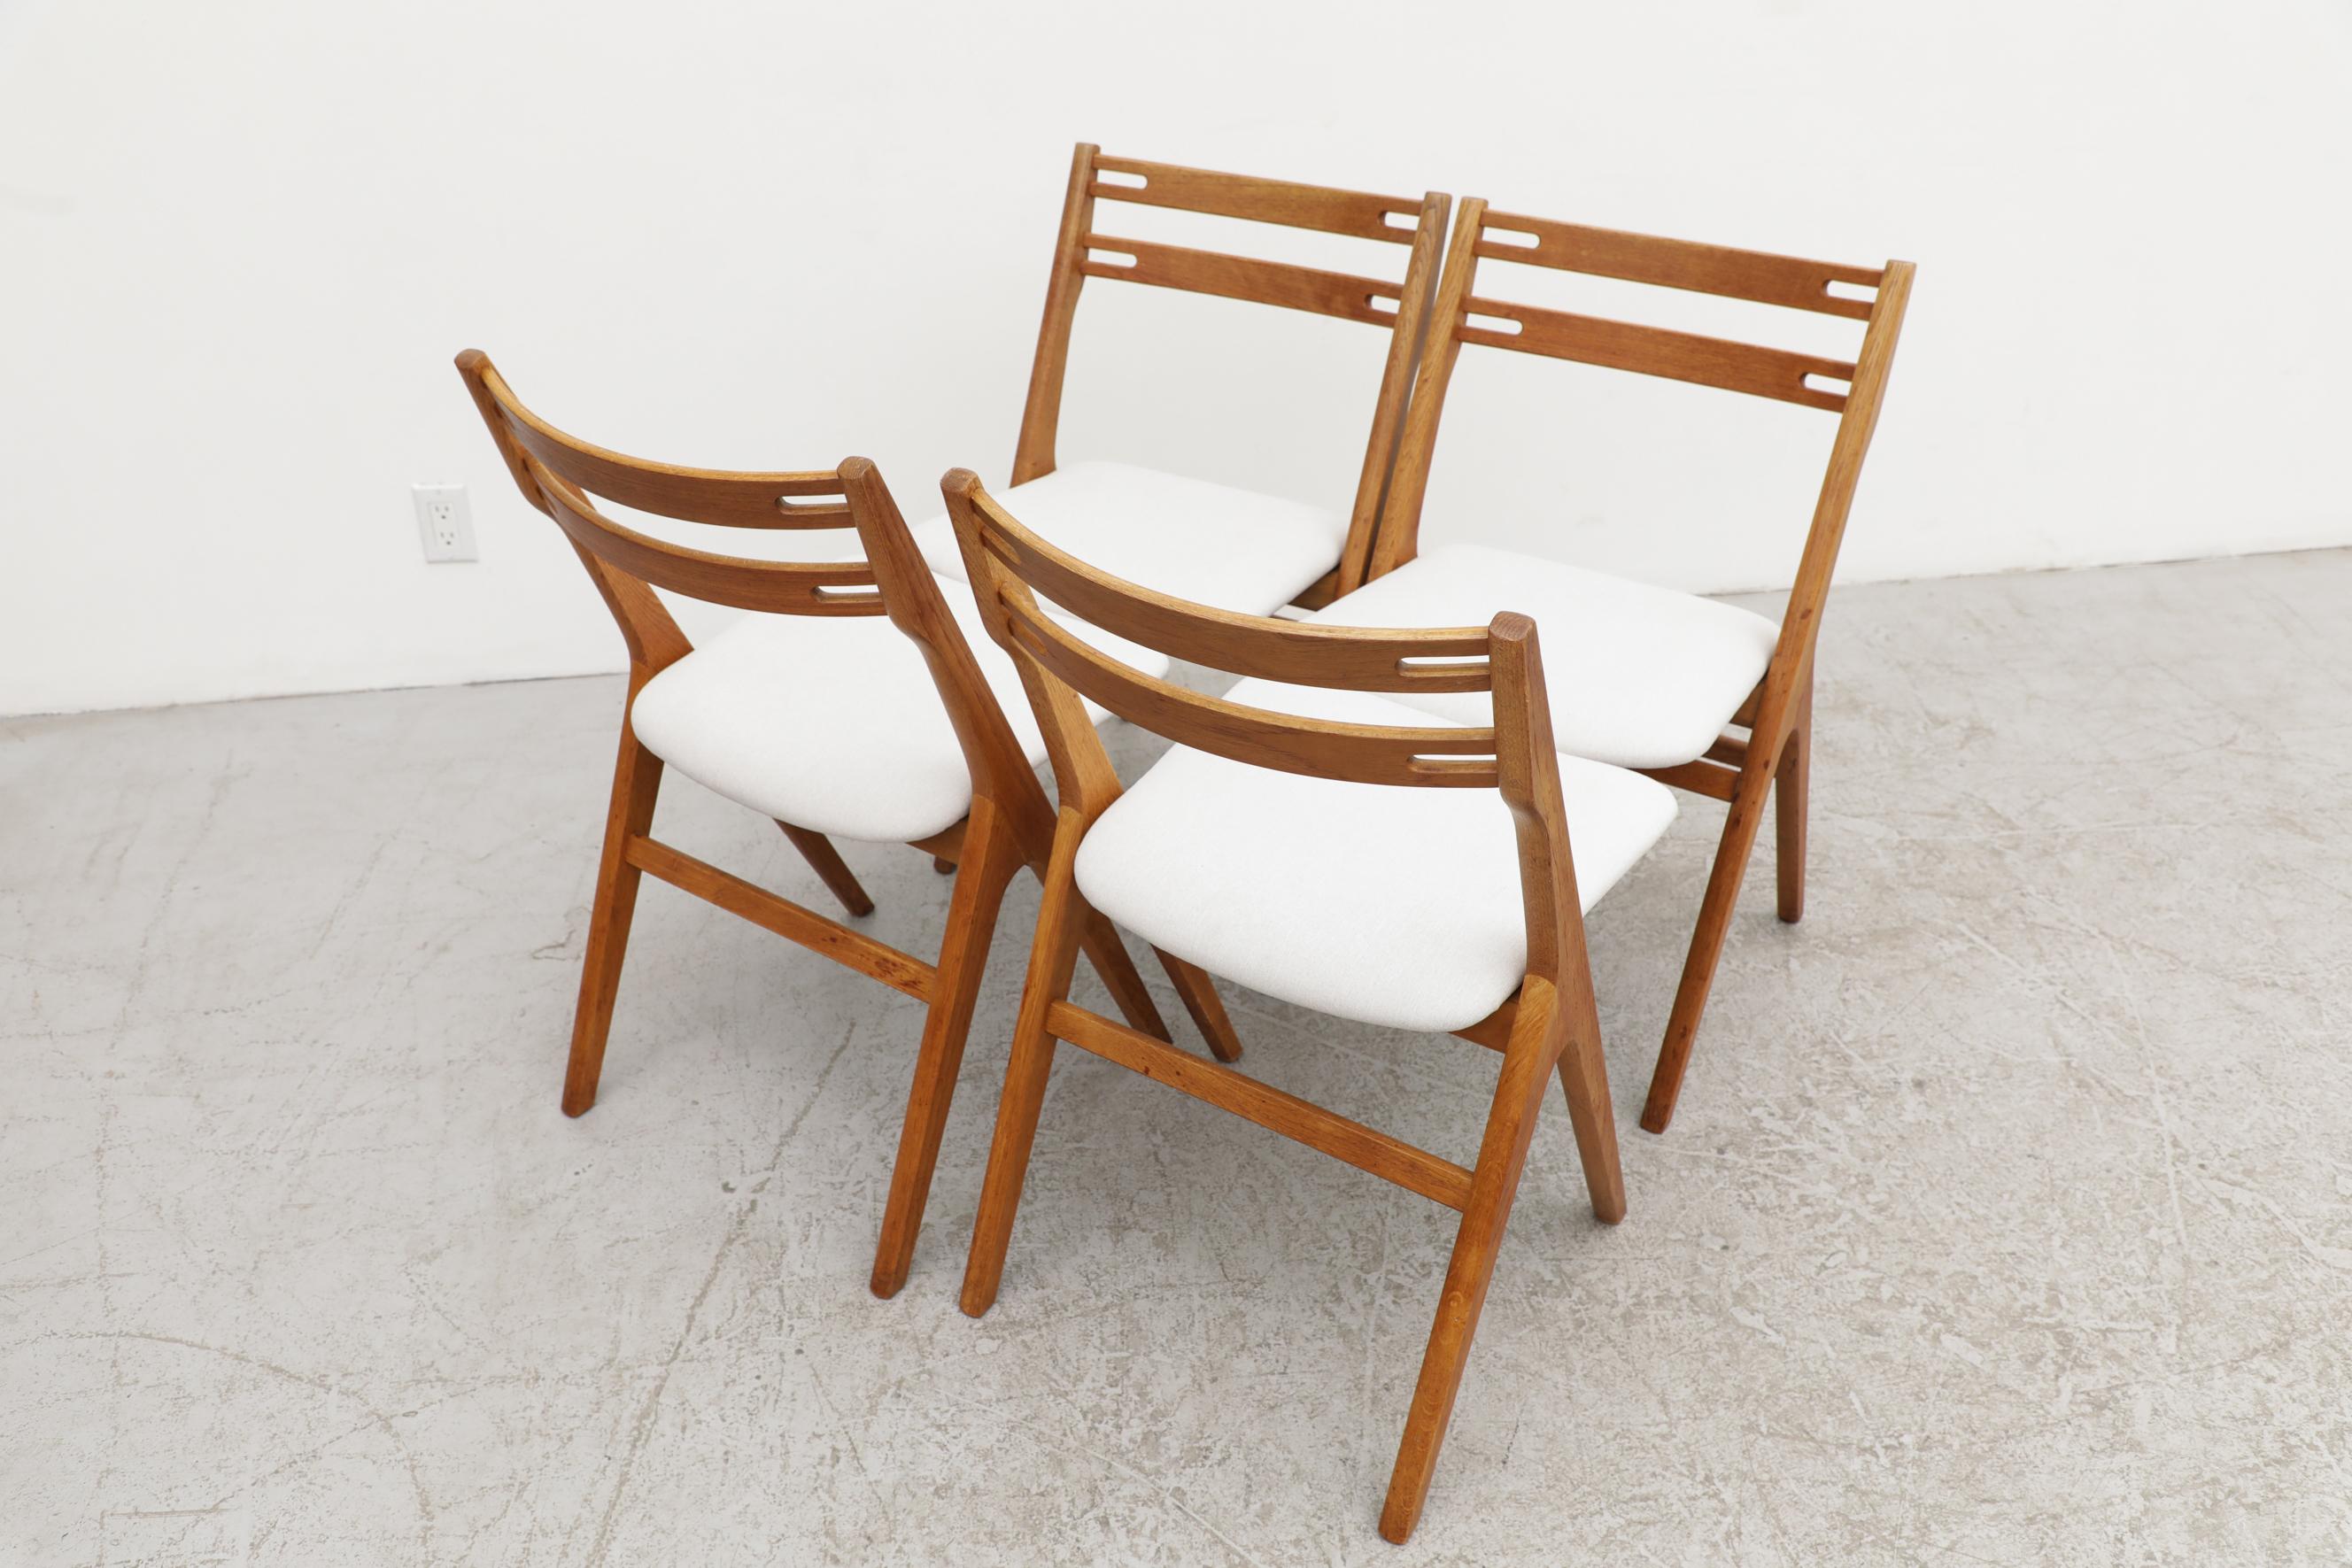 Set of 4 Hans Wegner Inspired Oak Dining Chairs by Sibast with White Seats For Sale 3